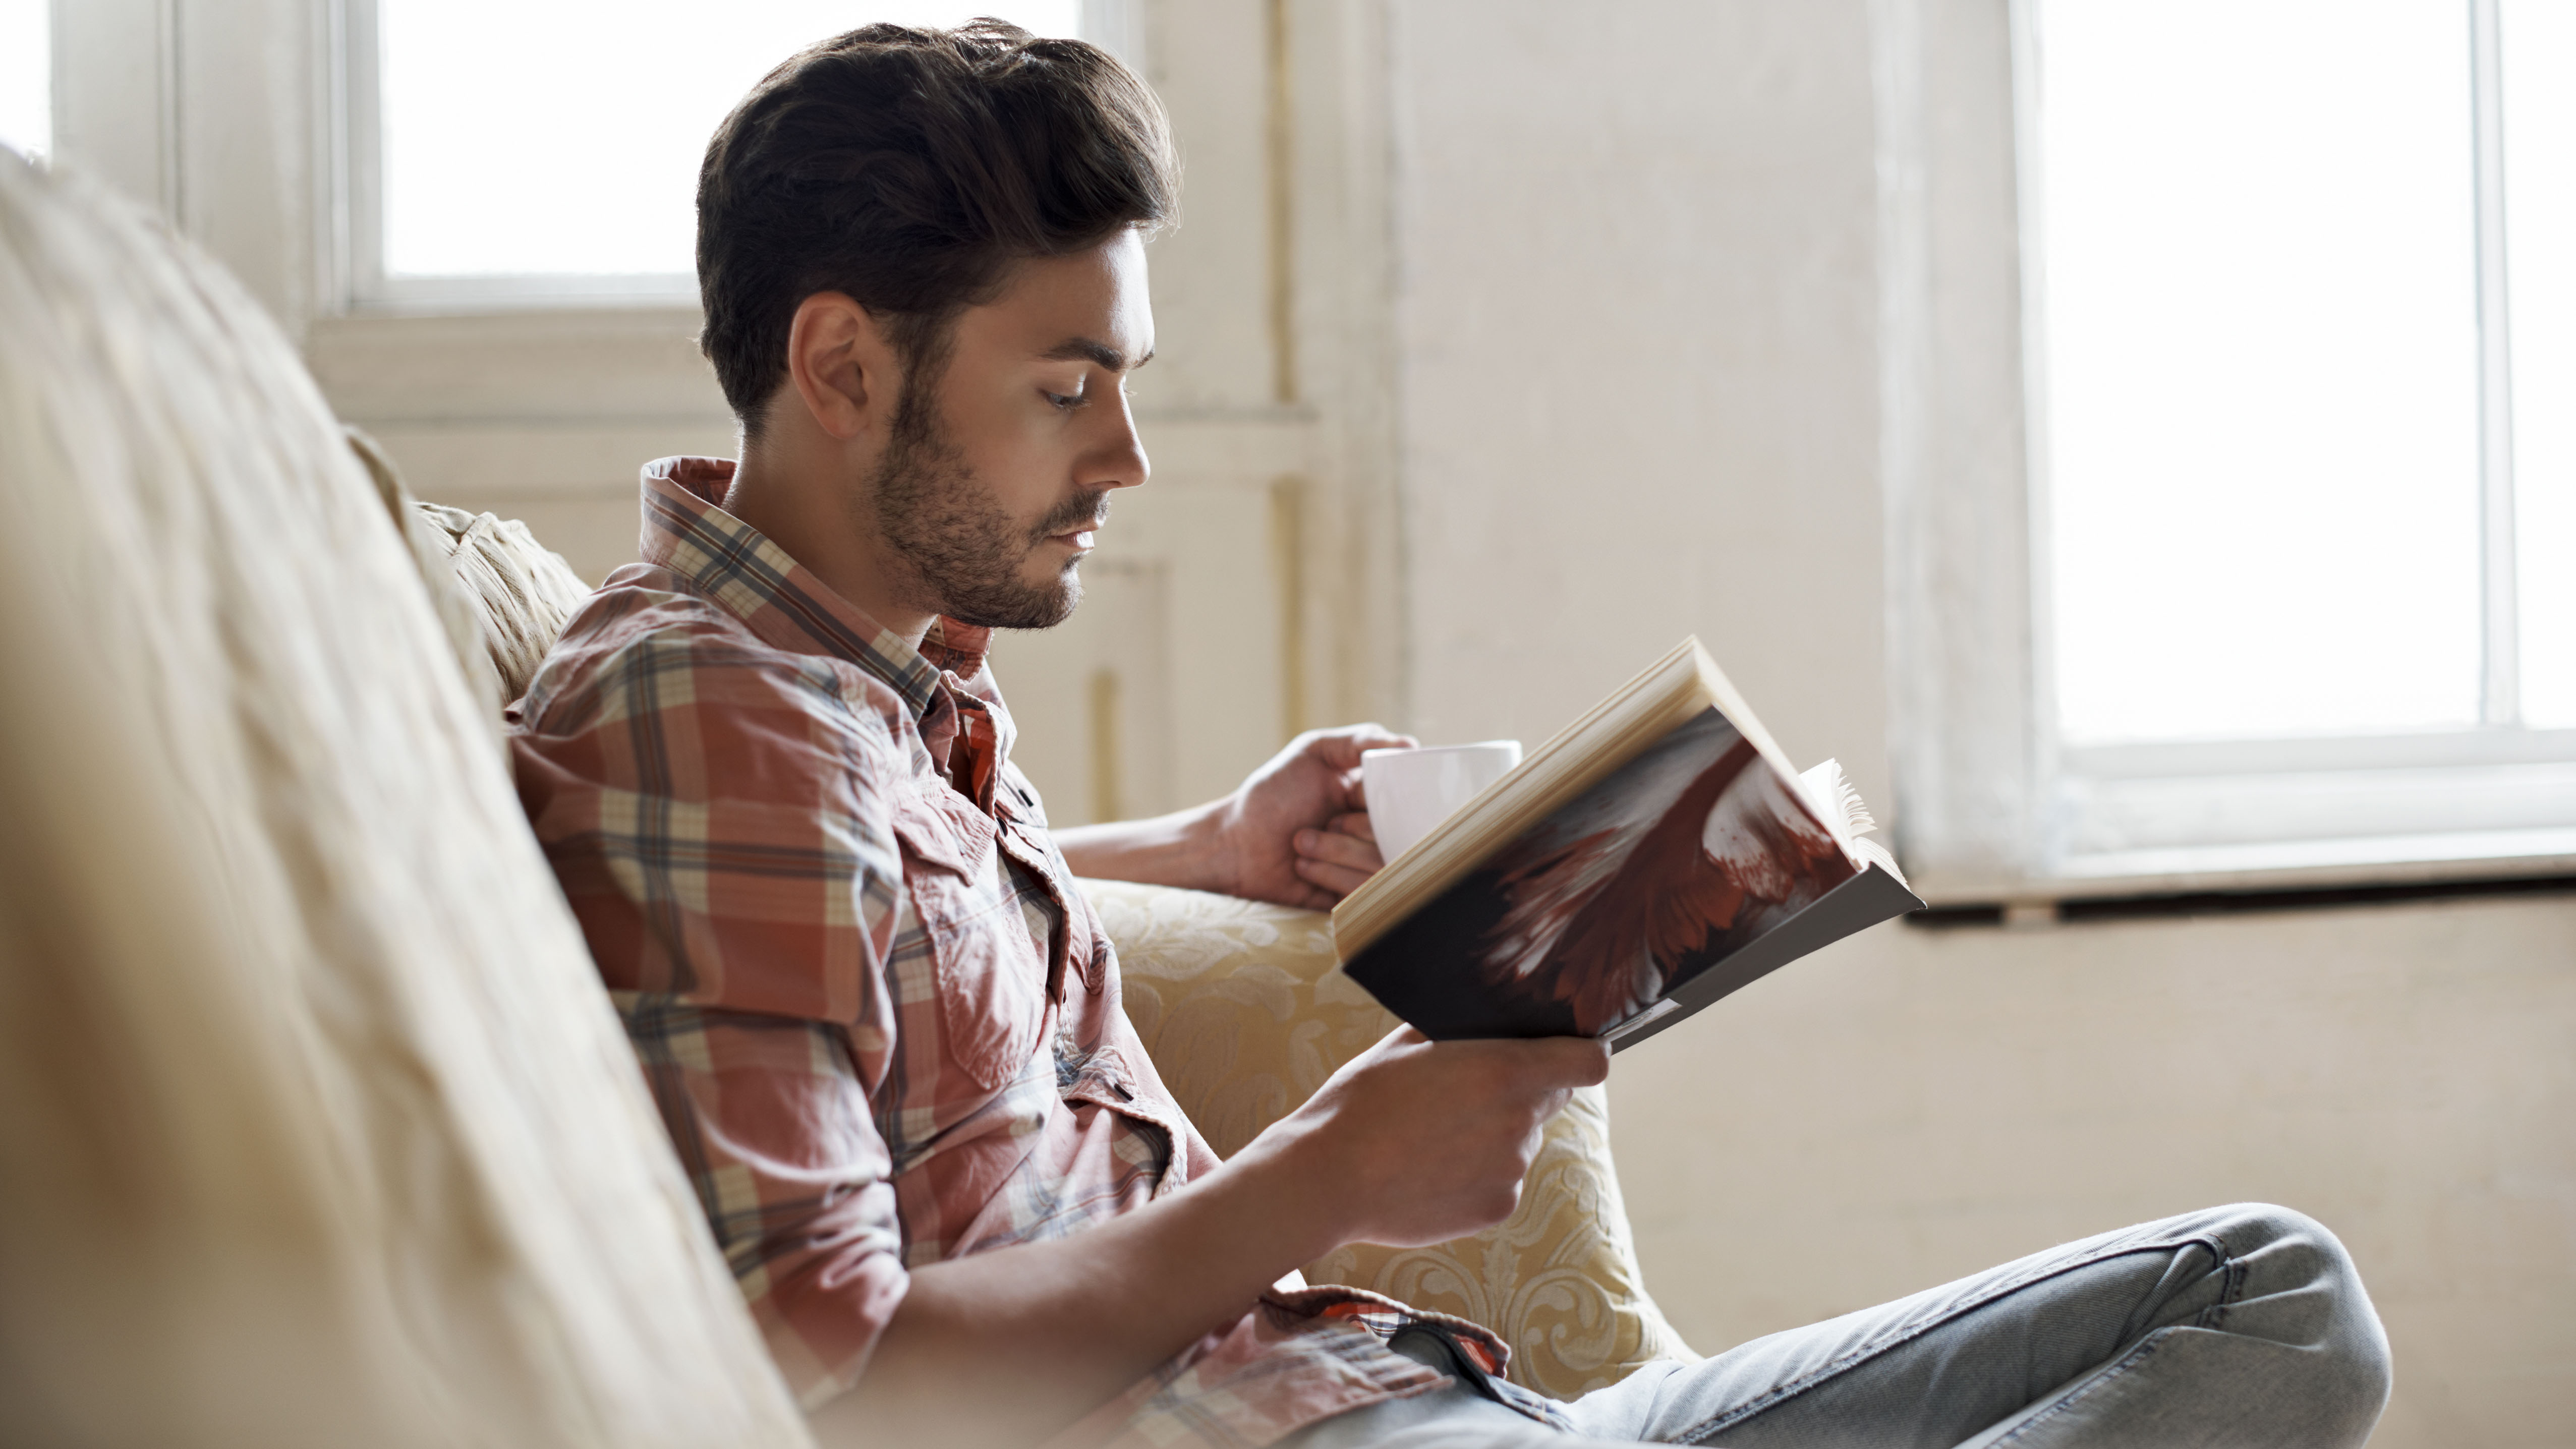 Man relaxing and reading book